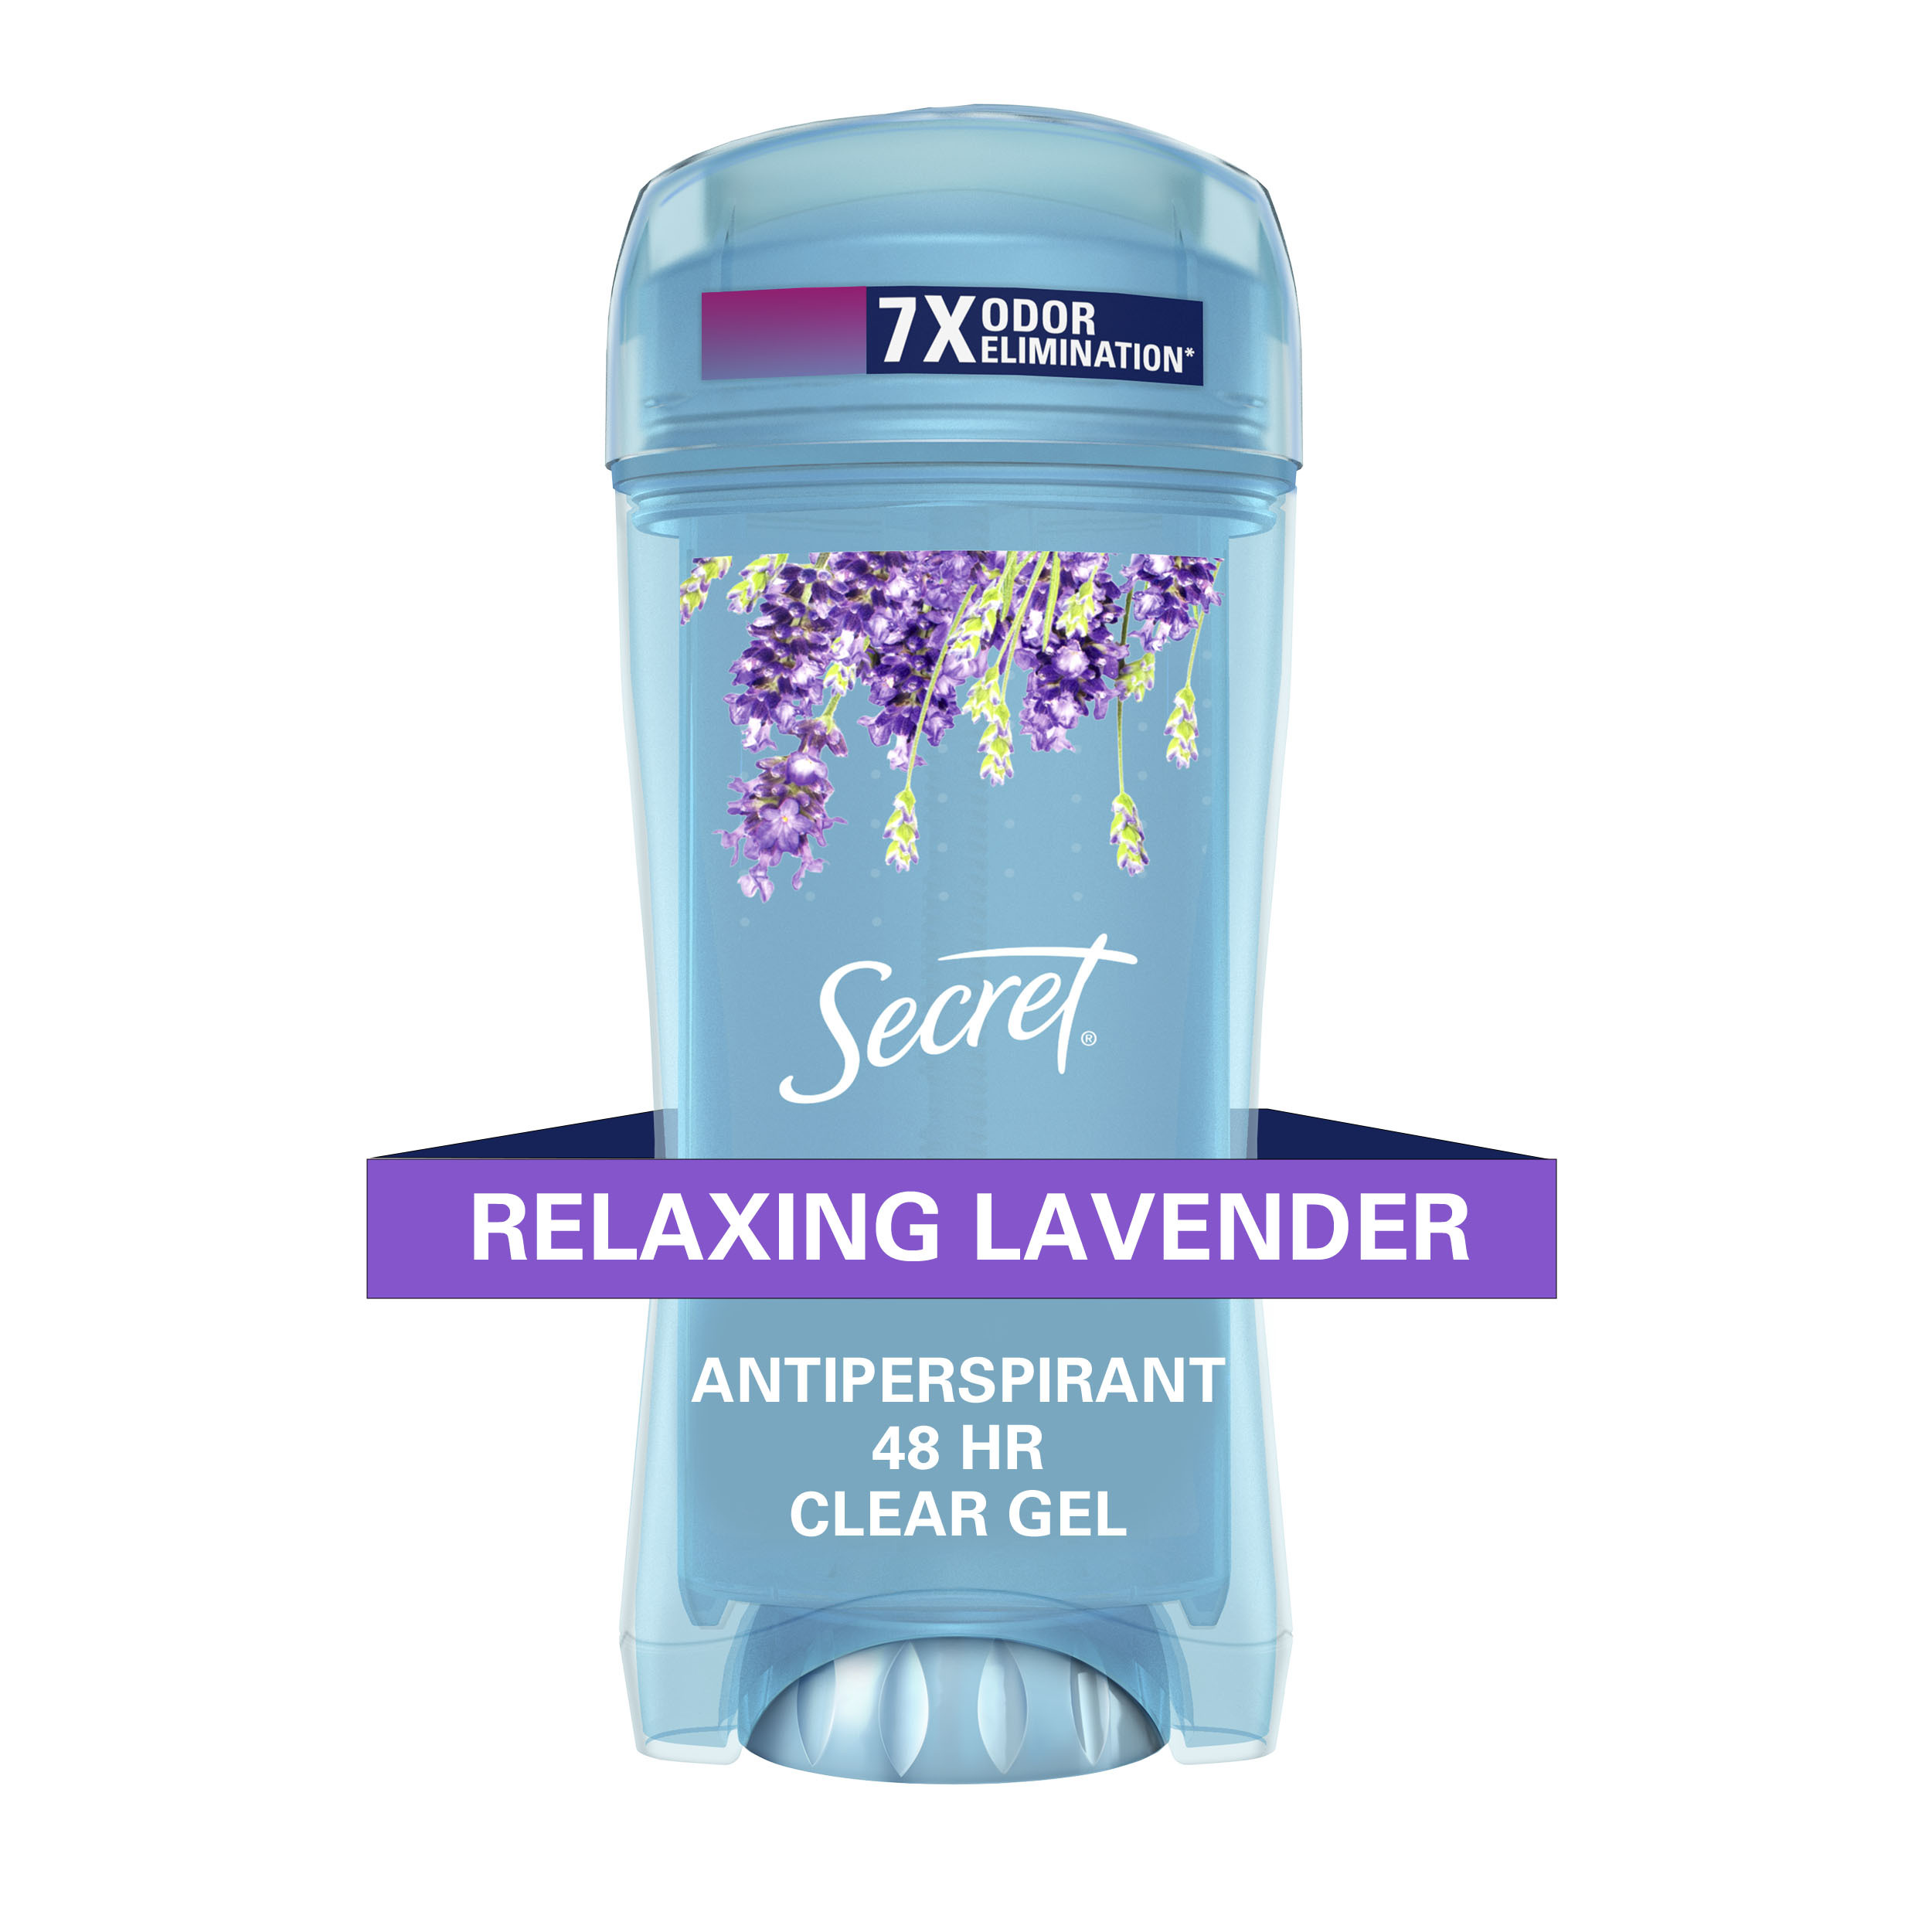 Secret Clear Gel and Deodorant for Women, Relaxing Refreshing Lavender, 2.6 oz - image 1 of 9